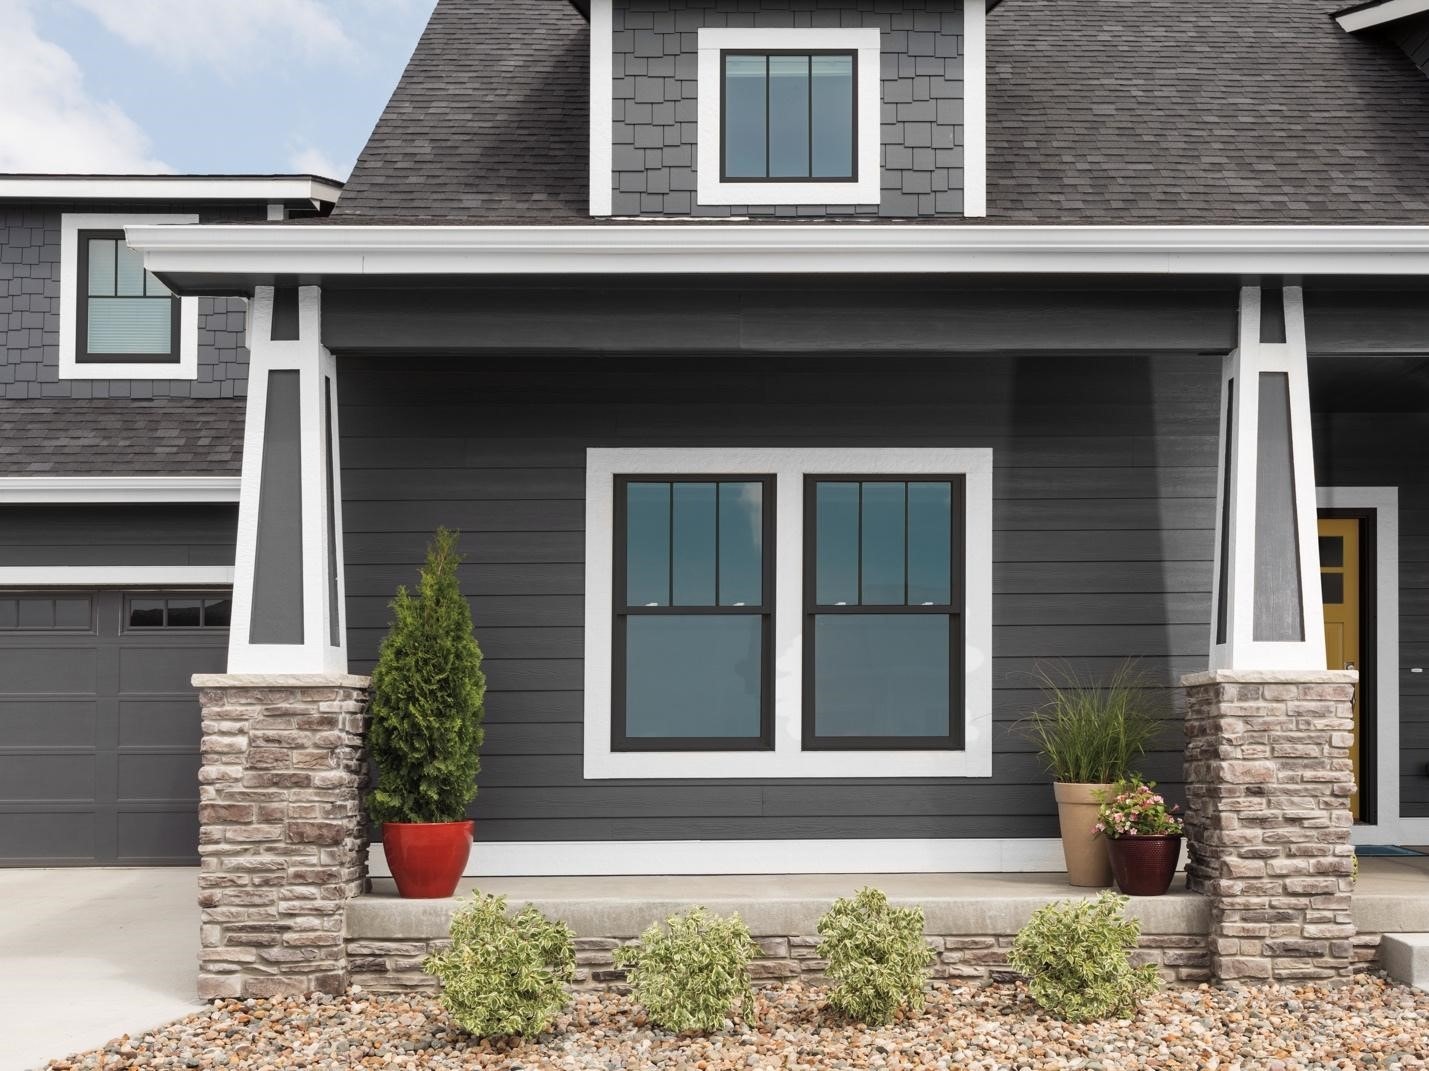 Exterior view of a gray craftsman-style home with black vinyl windows and white trim.